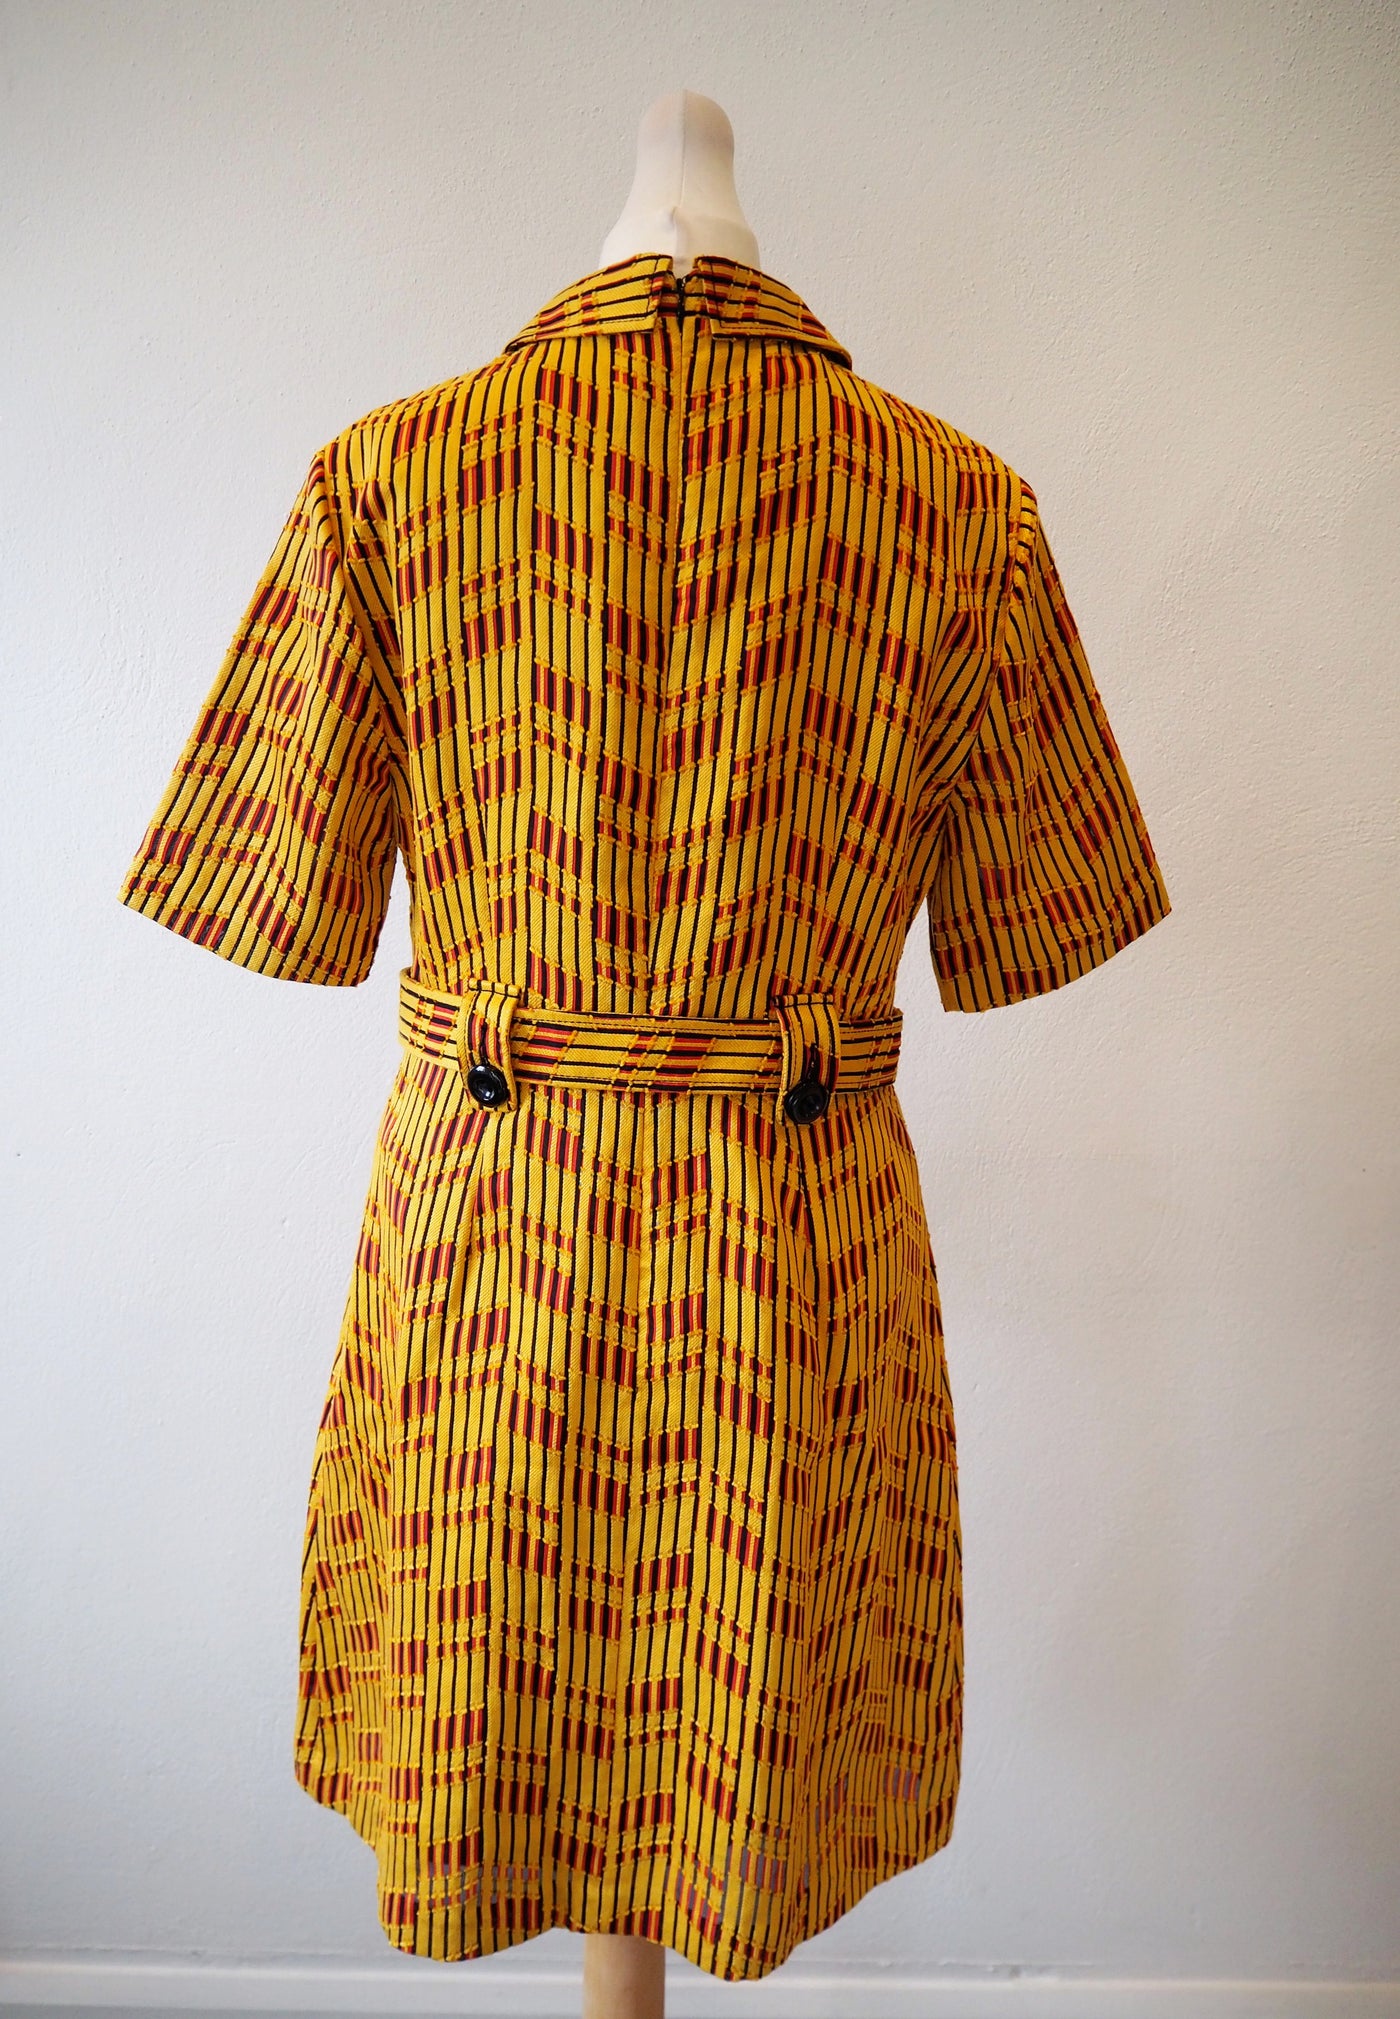 Damsel in a dress Yellow/Red shift 12